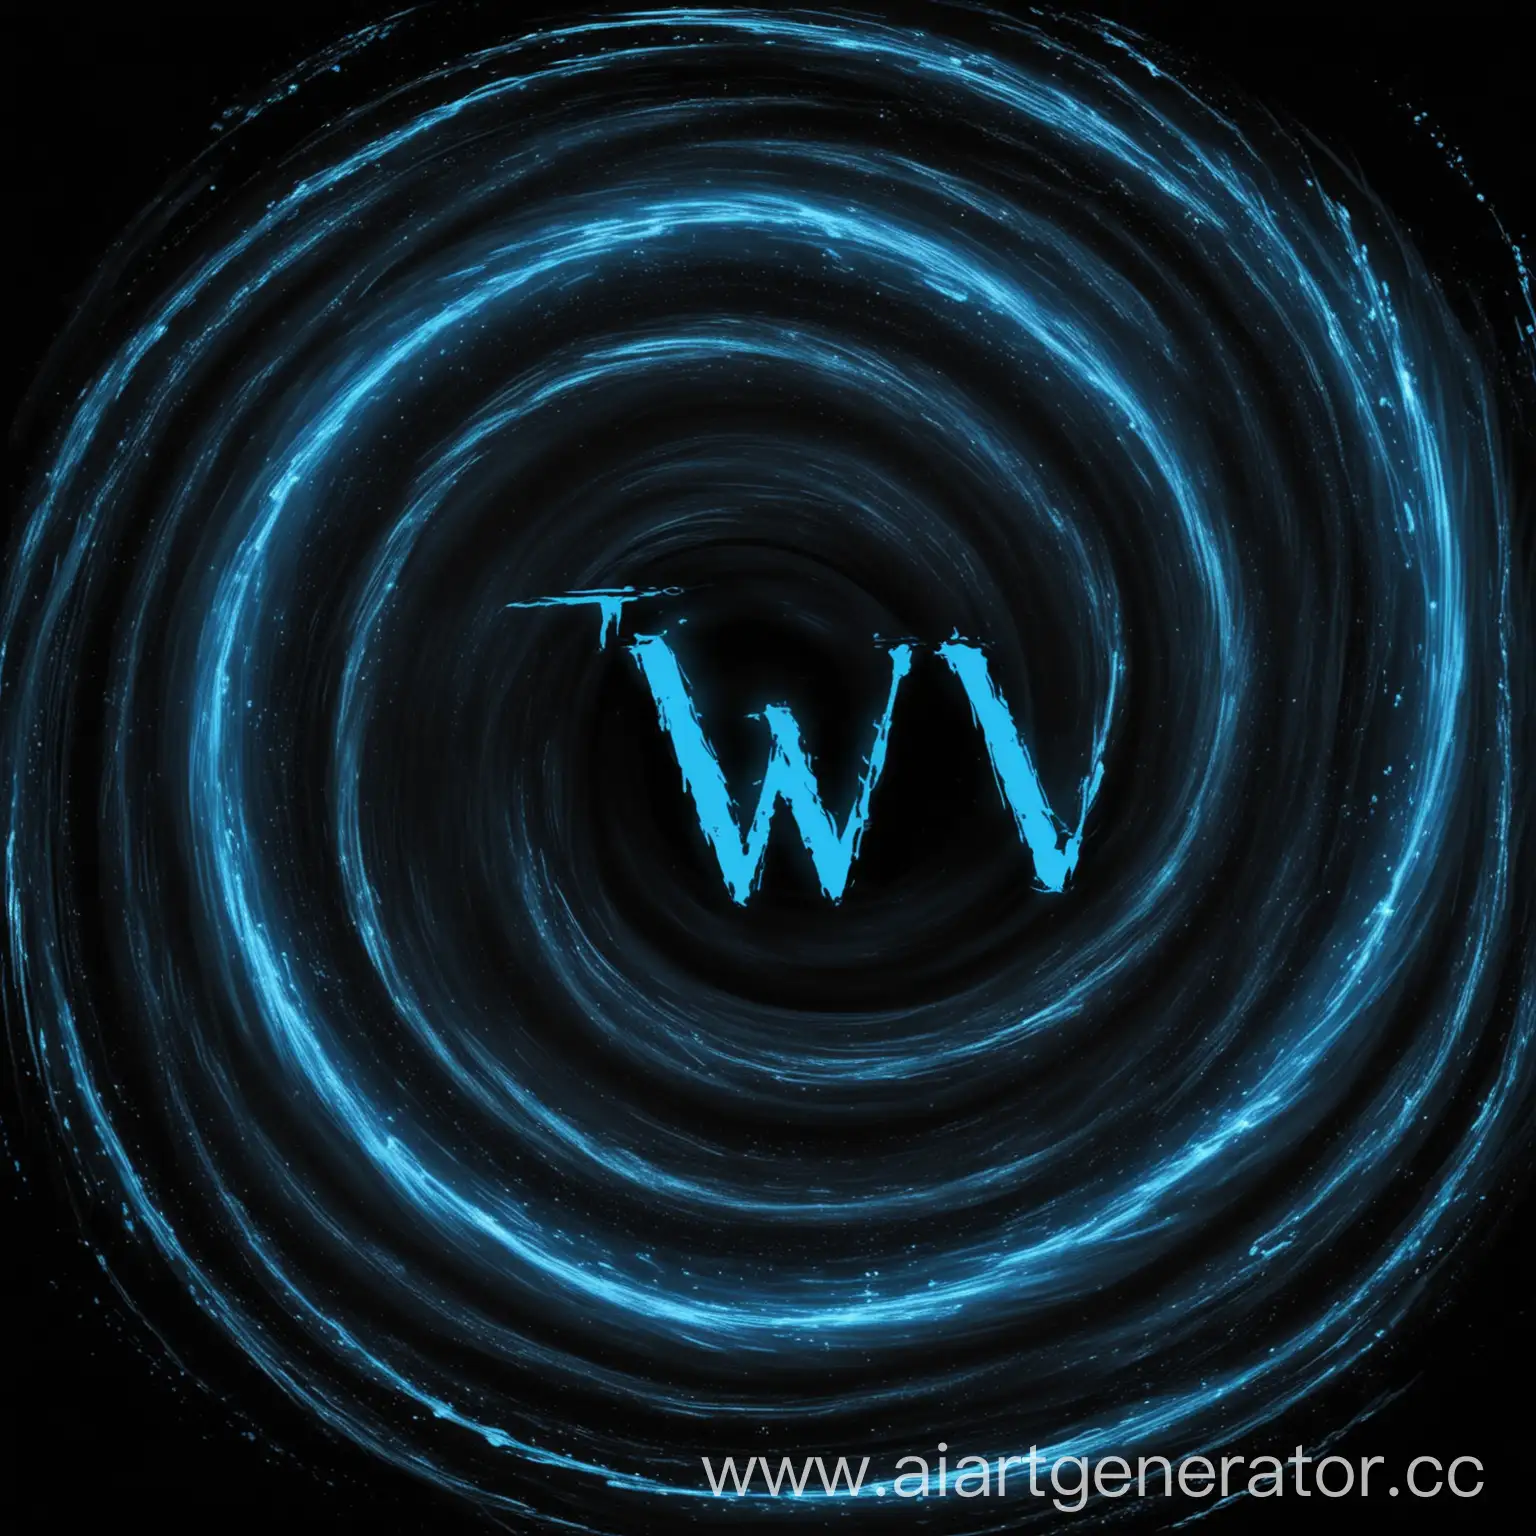 Blue-Whirl-on-Black-Background-with-Central-Letters-TBV